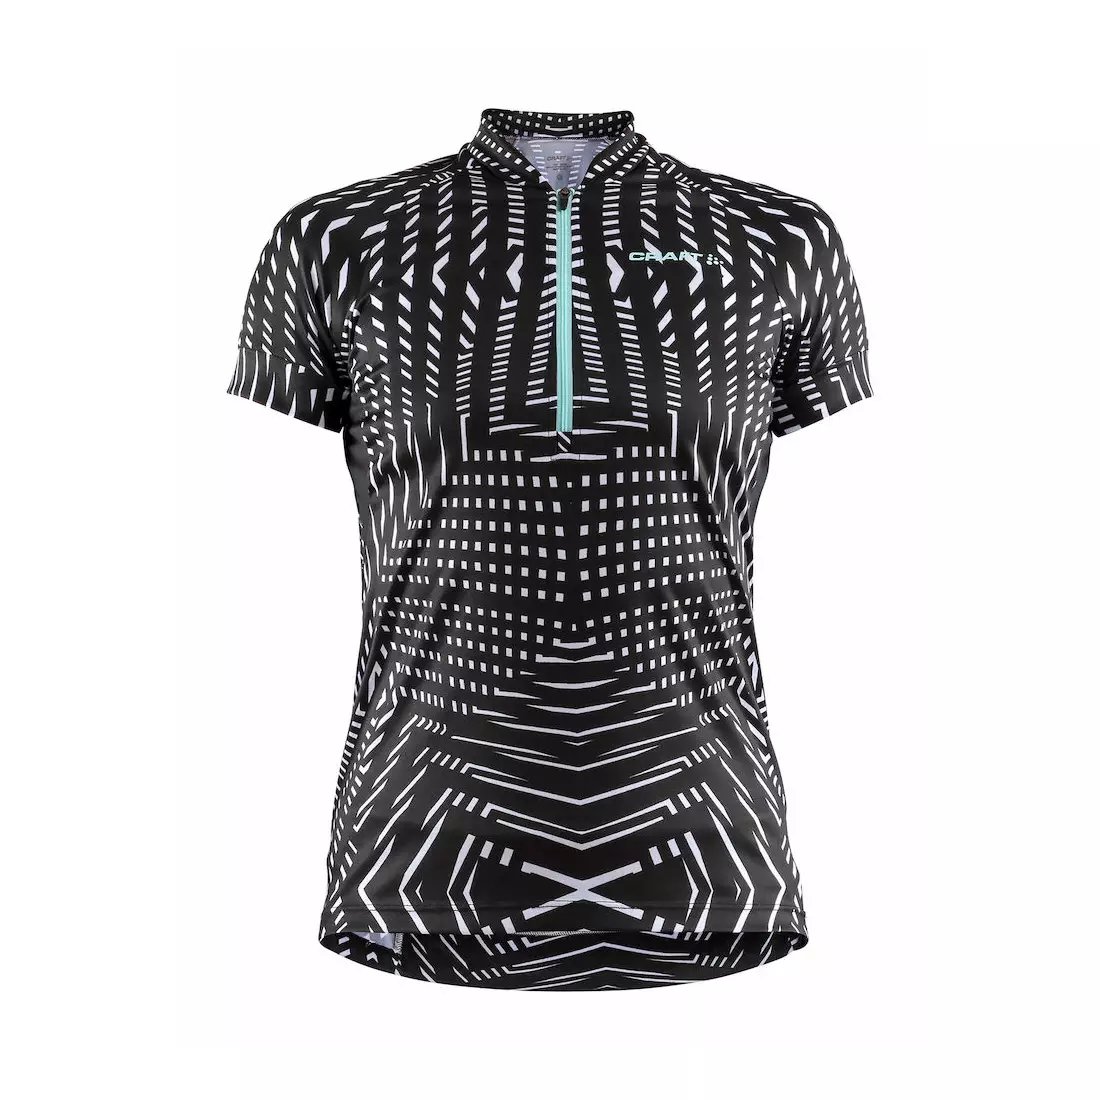 CRAFT VELO ART women's cycling jersey, black and white 1906147-999619